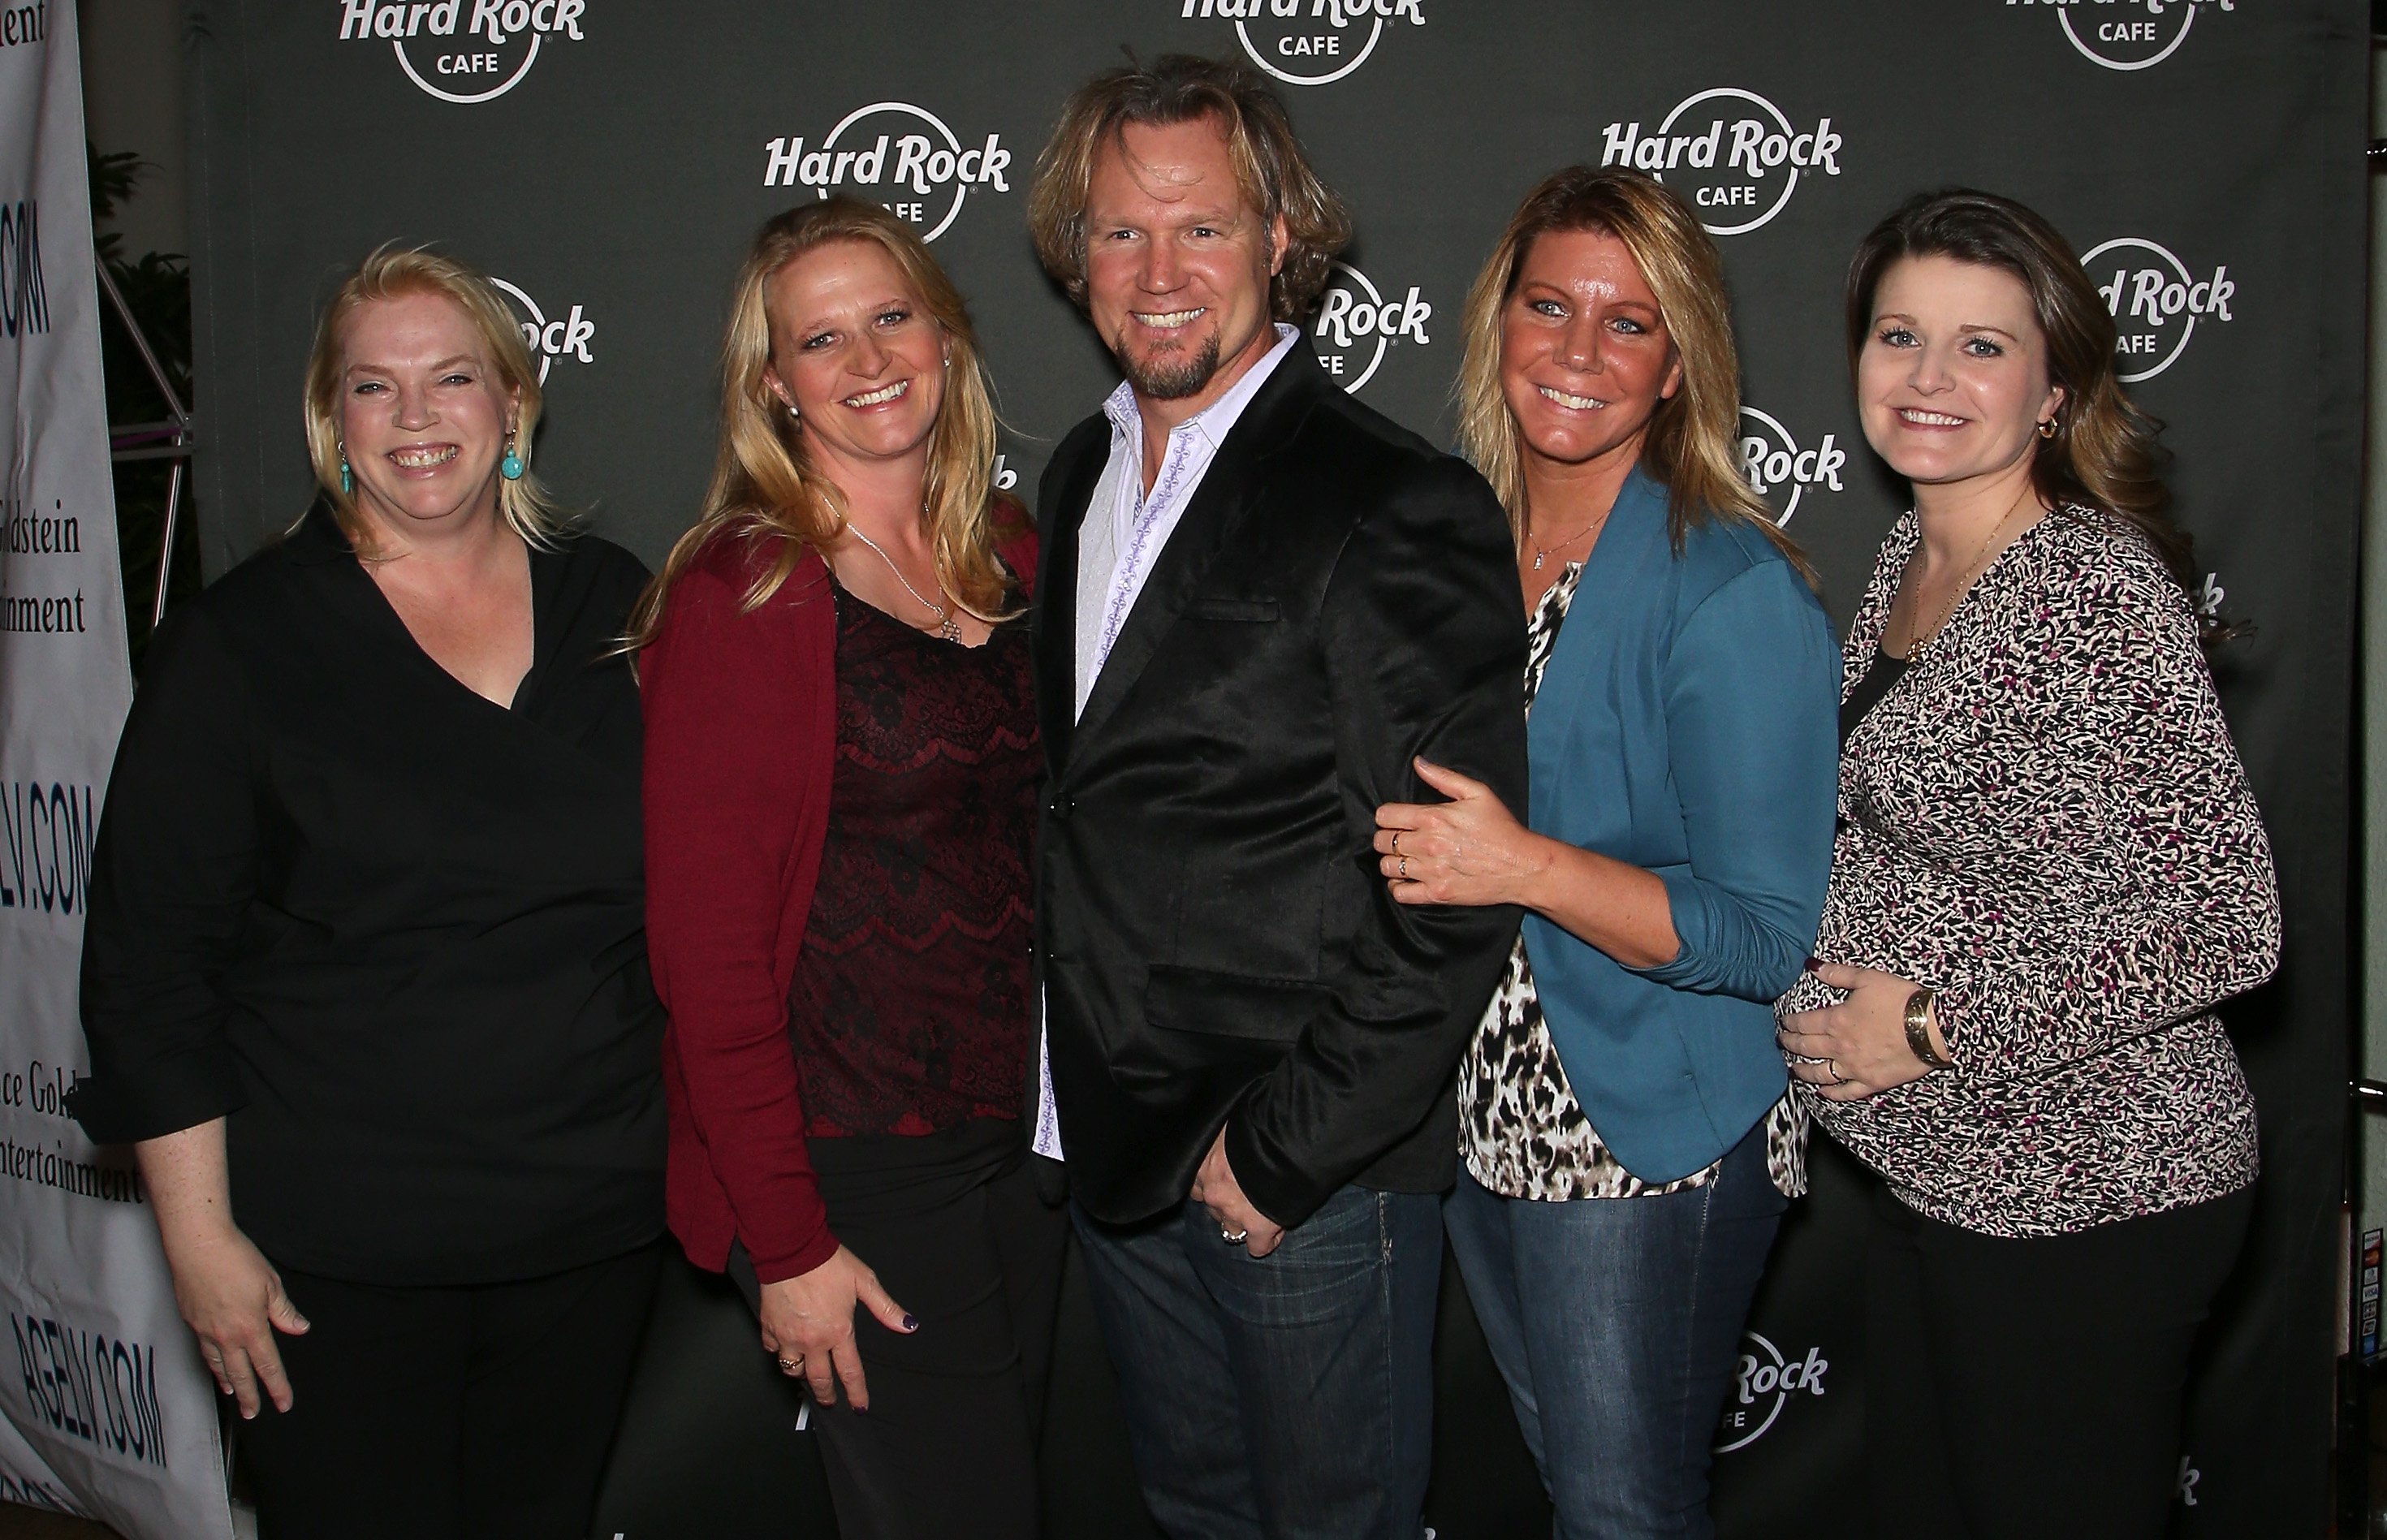 Kody Brown and his wives, Janelle Brown, Christine Brown, Meri Brown and Robyn Brown, attend Hard Rock Cafe Las Vegas at Hard Rock Hotel's 25th anniversary celebration on October 10, 2015 | Photo: Getty Images